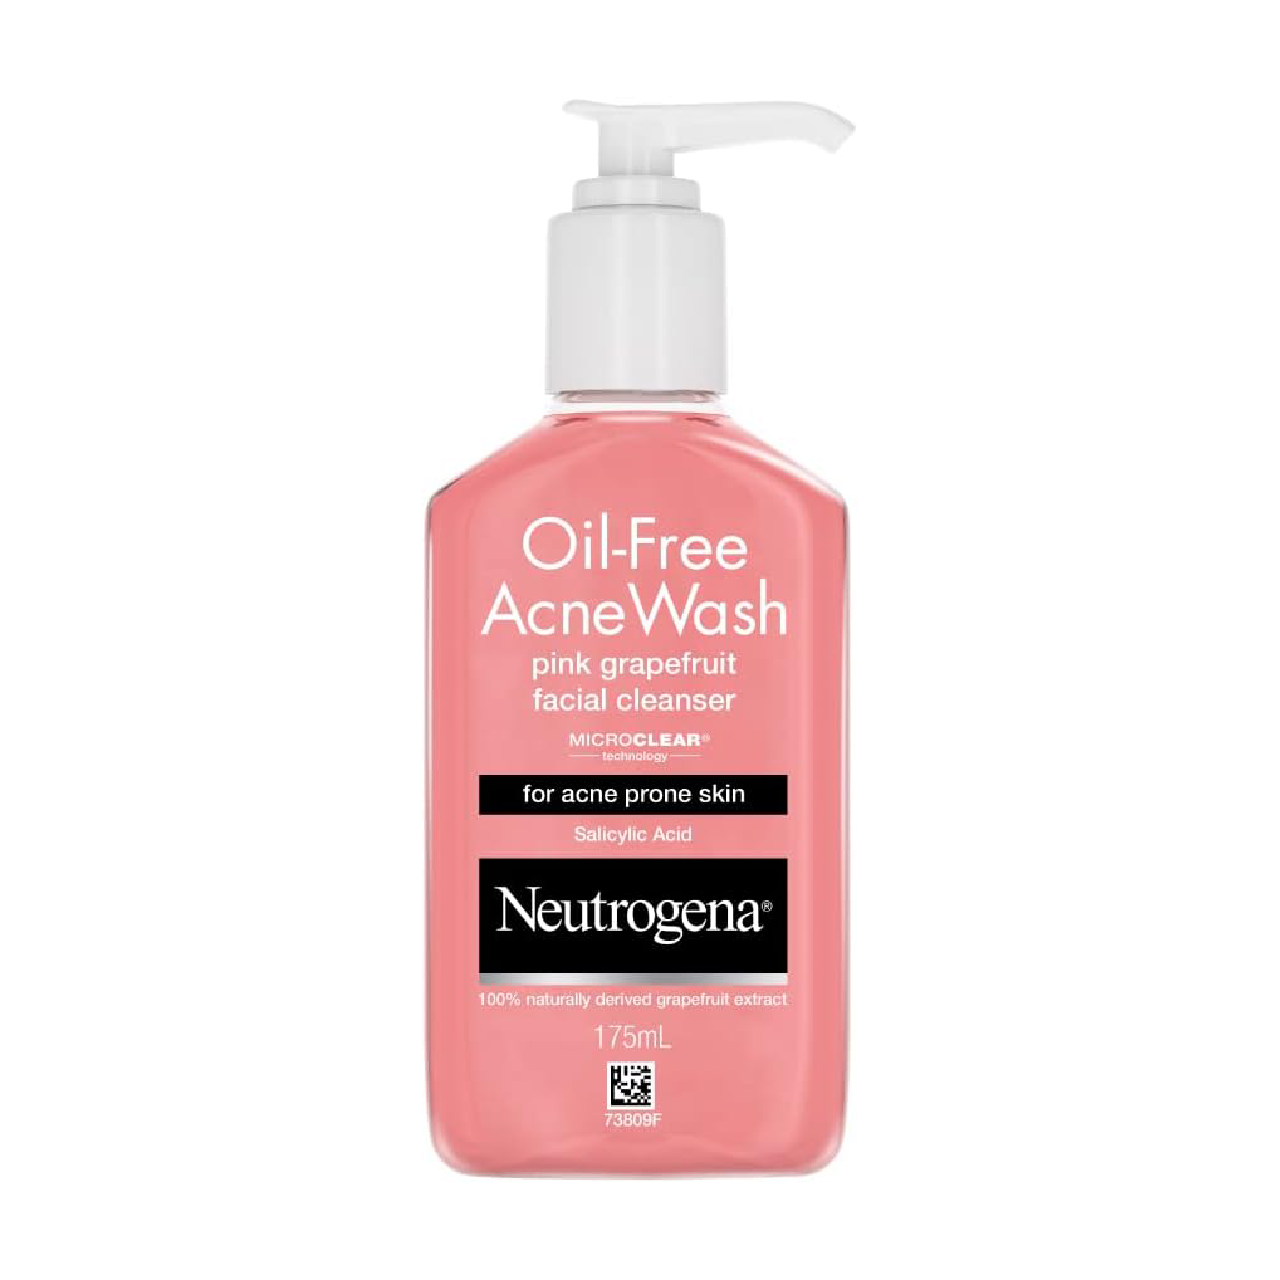 Bottle of Neutrogena Oil-Free Acne Wash displayed against a white background